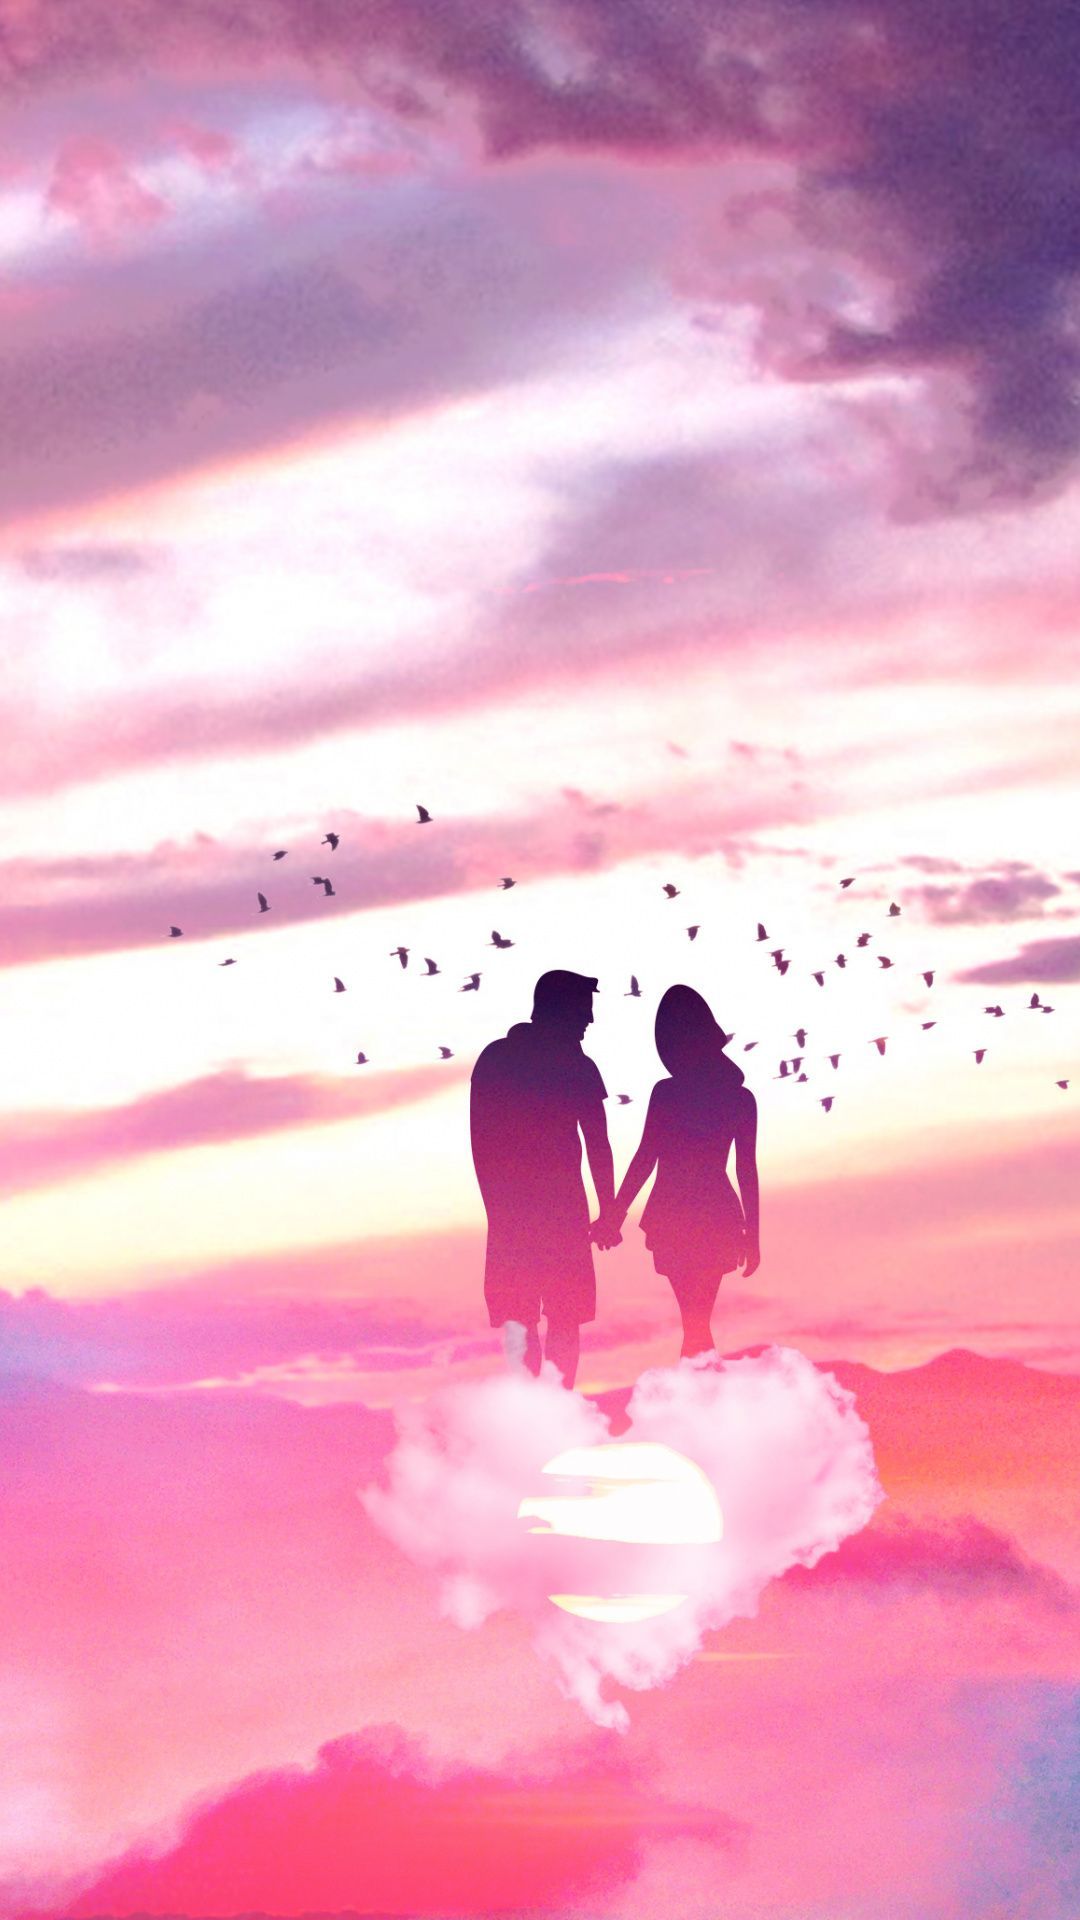 Couple, love, sky, clouds, fantasy wallpaper. Cool background, Wallpaper, Galaxy picture